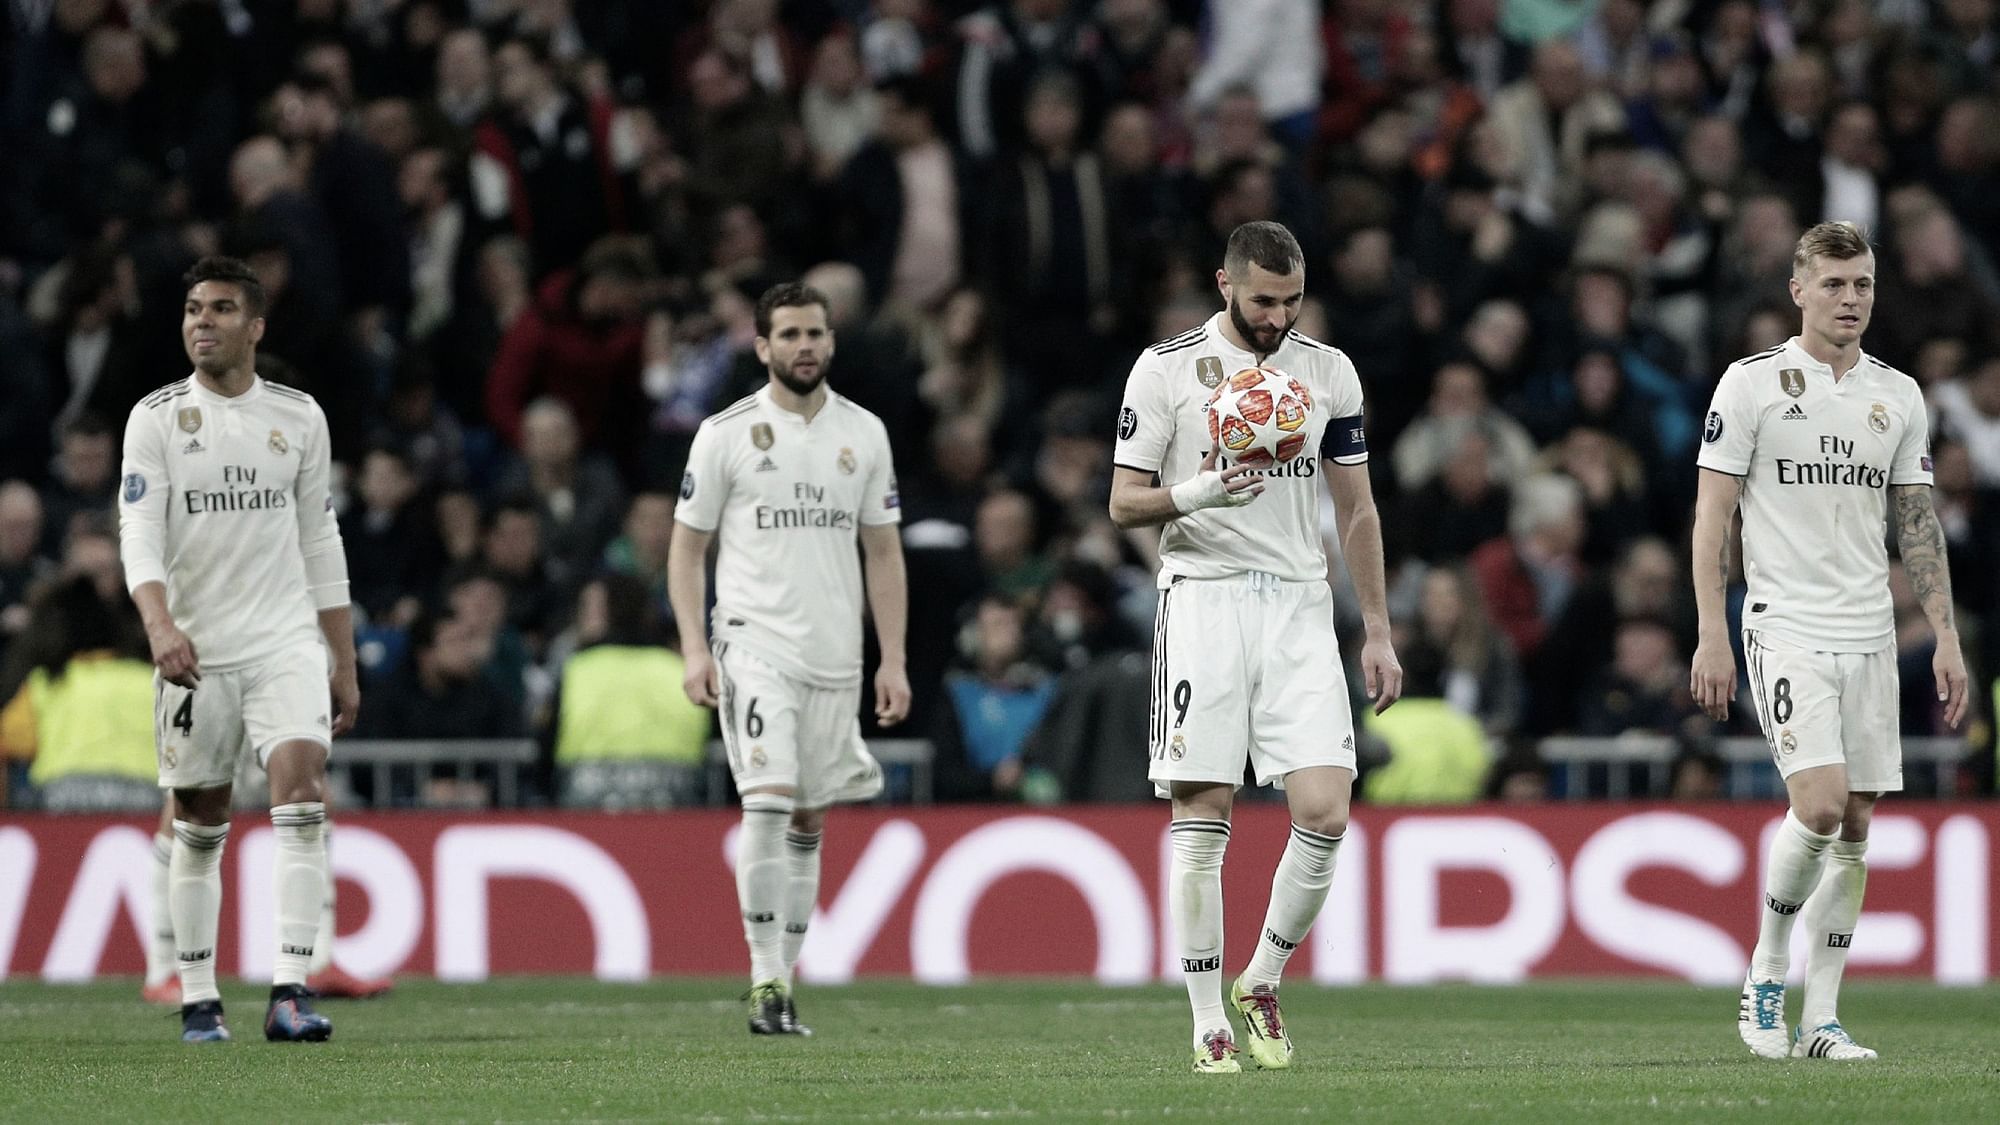 Down, and out: Real Madrid players cut a forlorn figure during their defeat to Ajax, which saw them crash out of the UEFA Champions League.